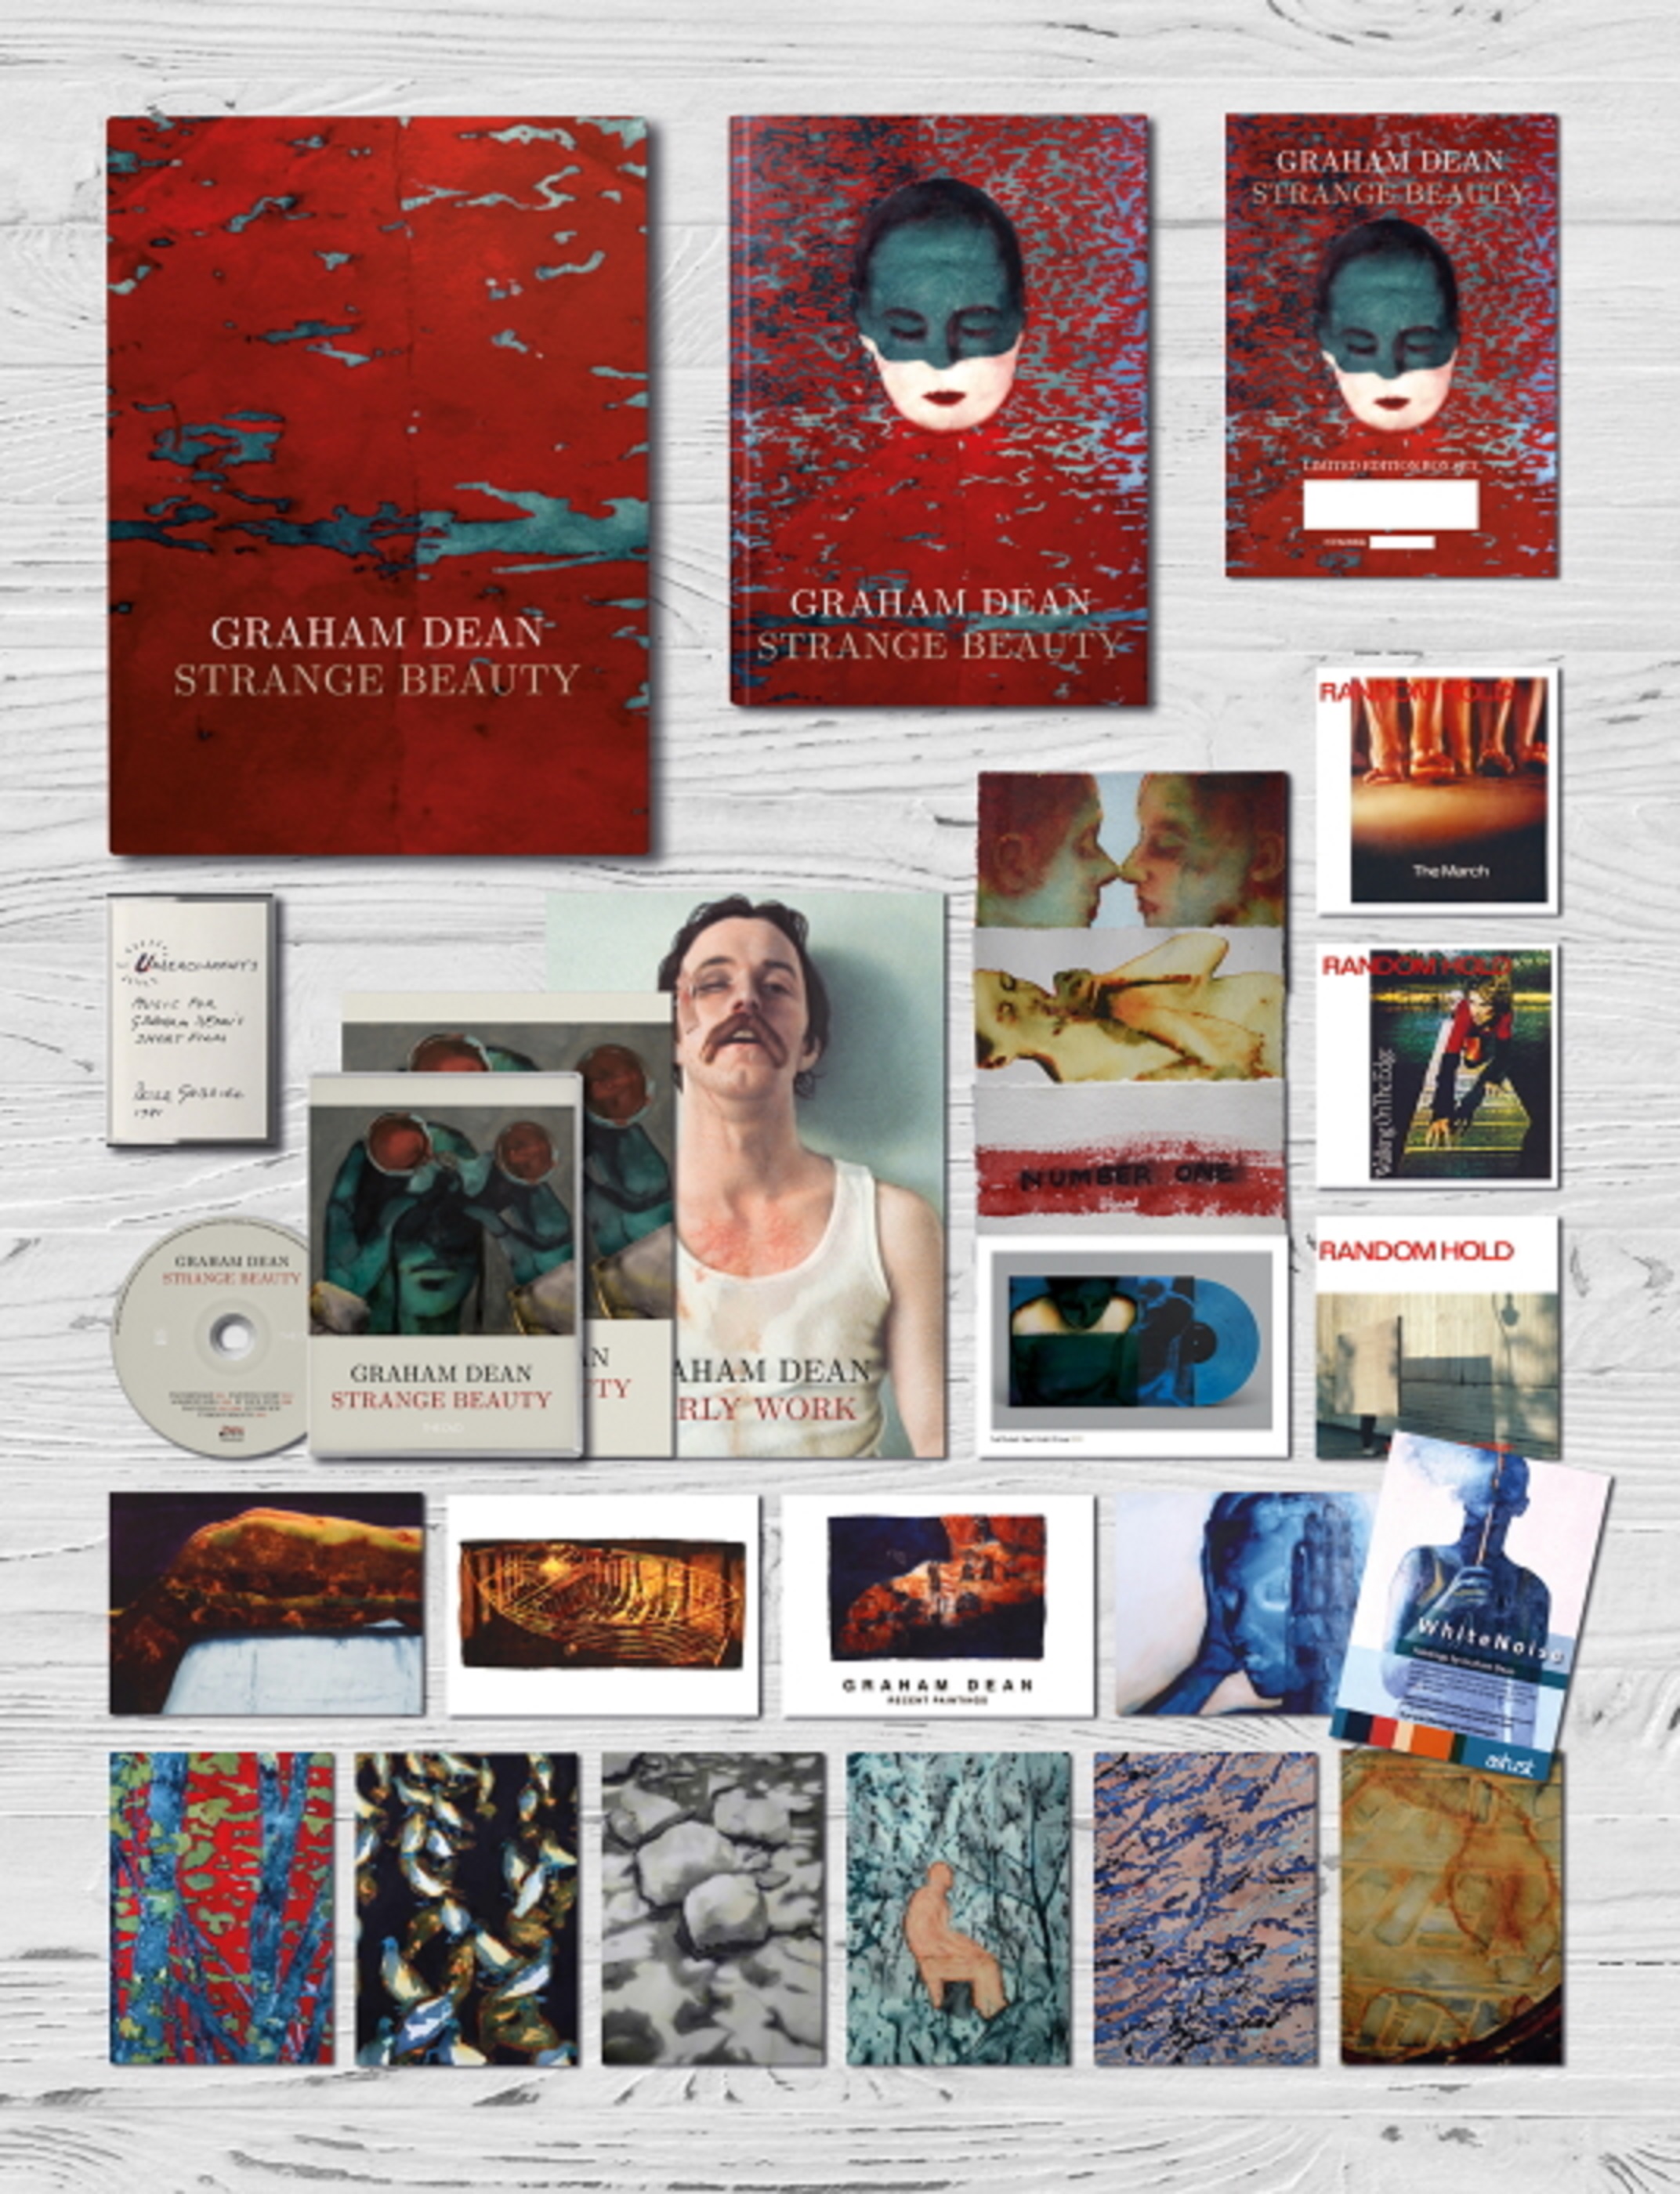 Renowned Artist Graham Dean “Strange Beauty” Deluxe Edition Box Set With Book & DVD Featuring Unreleased Soundtrack By Peter Gabriel | Grateful Web